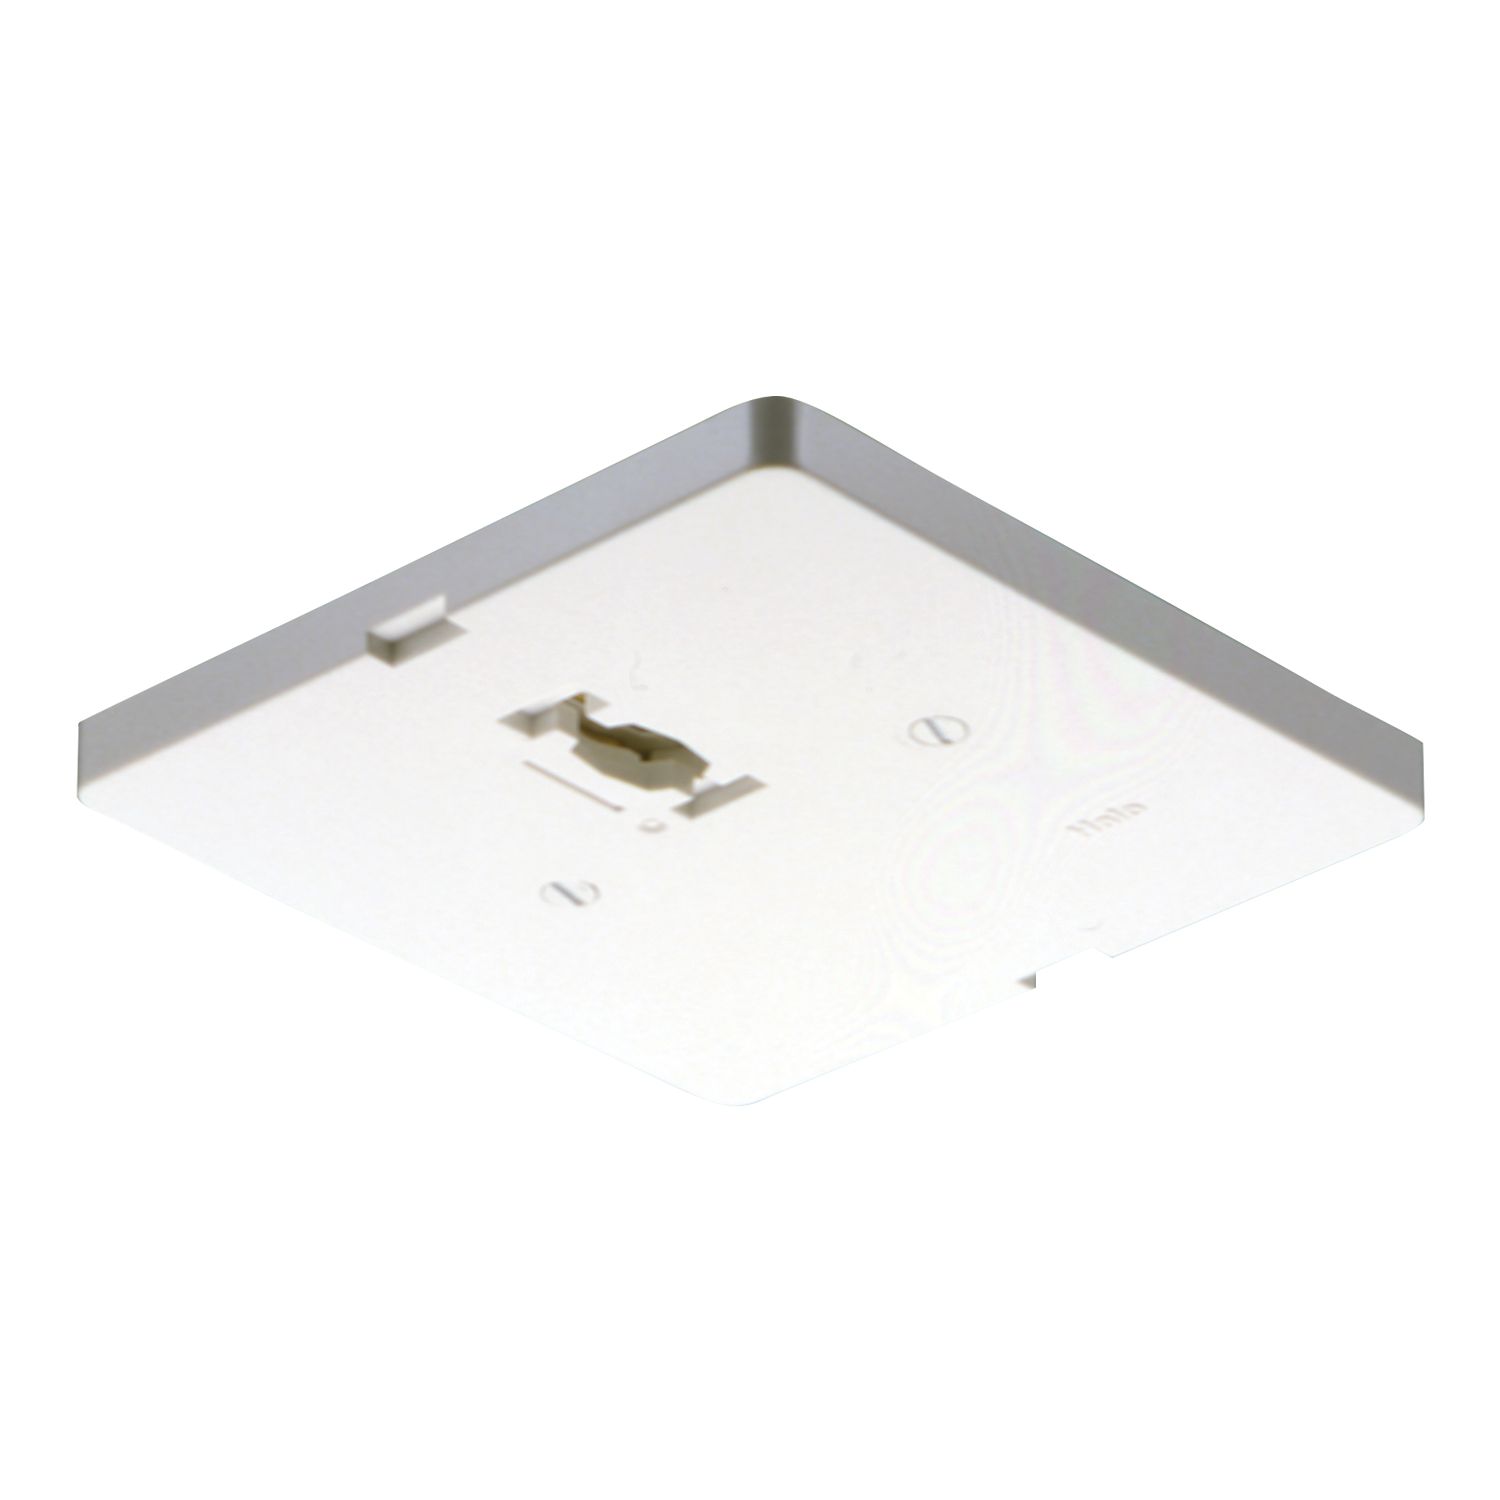 LOW VOLTAGE CANOPY ADAPTE R, WHITE